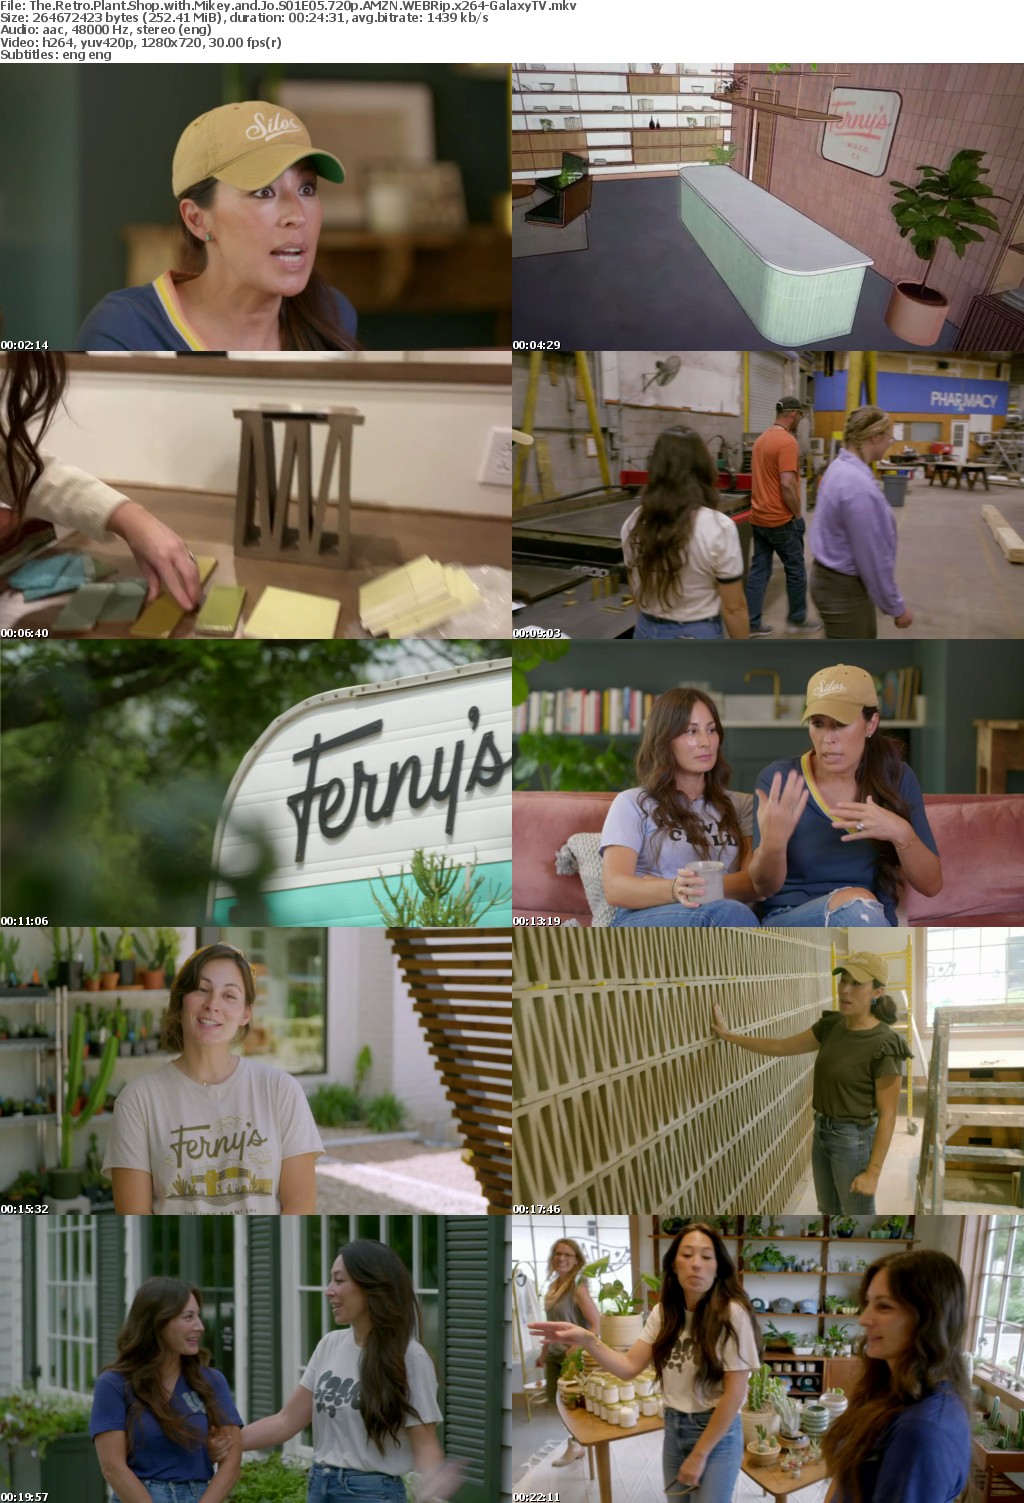 The Retro Plant Shop with Mikey and Jo S01 COMPLETE 720p AMZN WEBRip x264-GalaxyTV